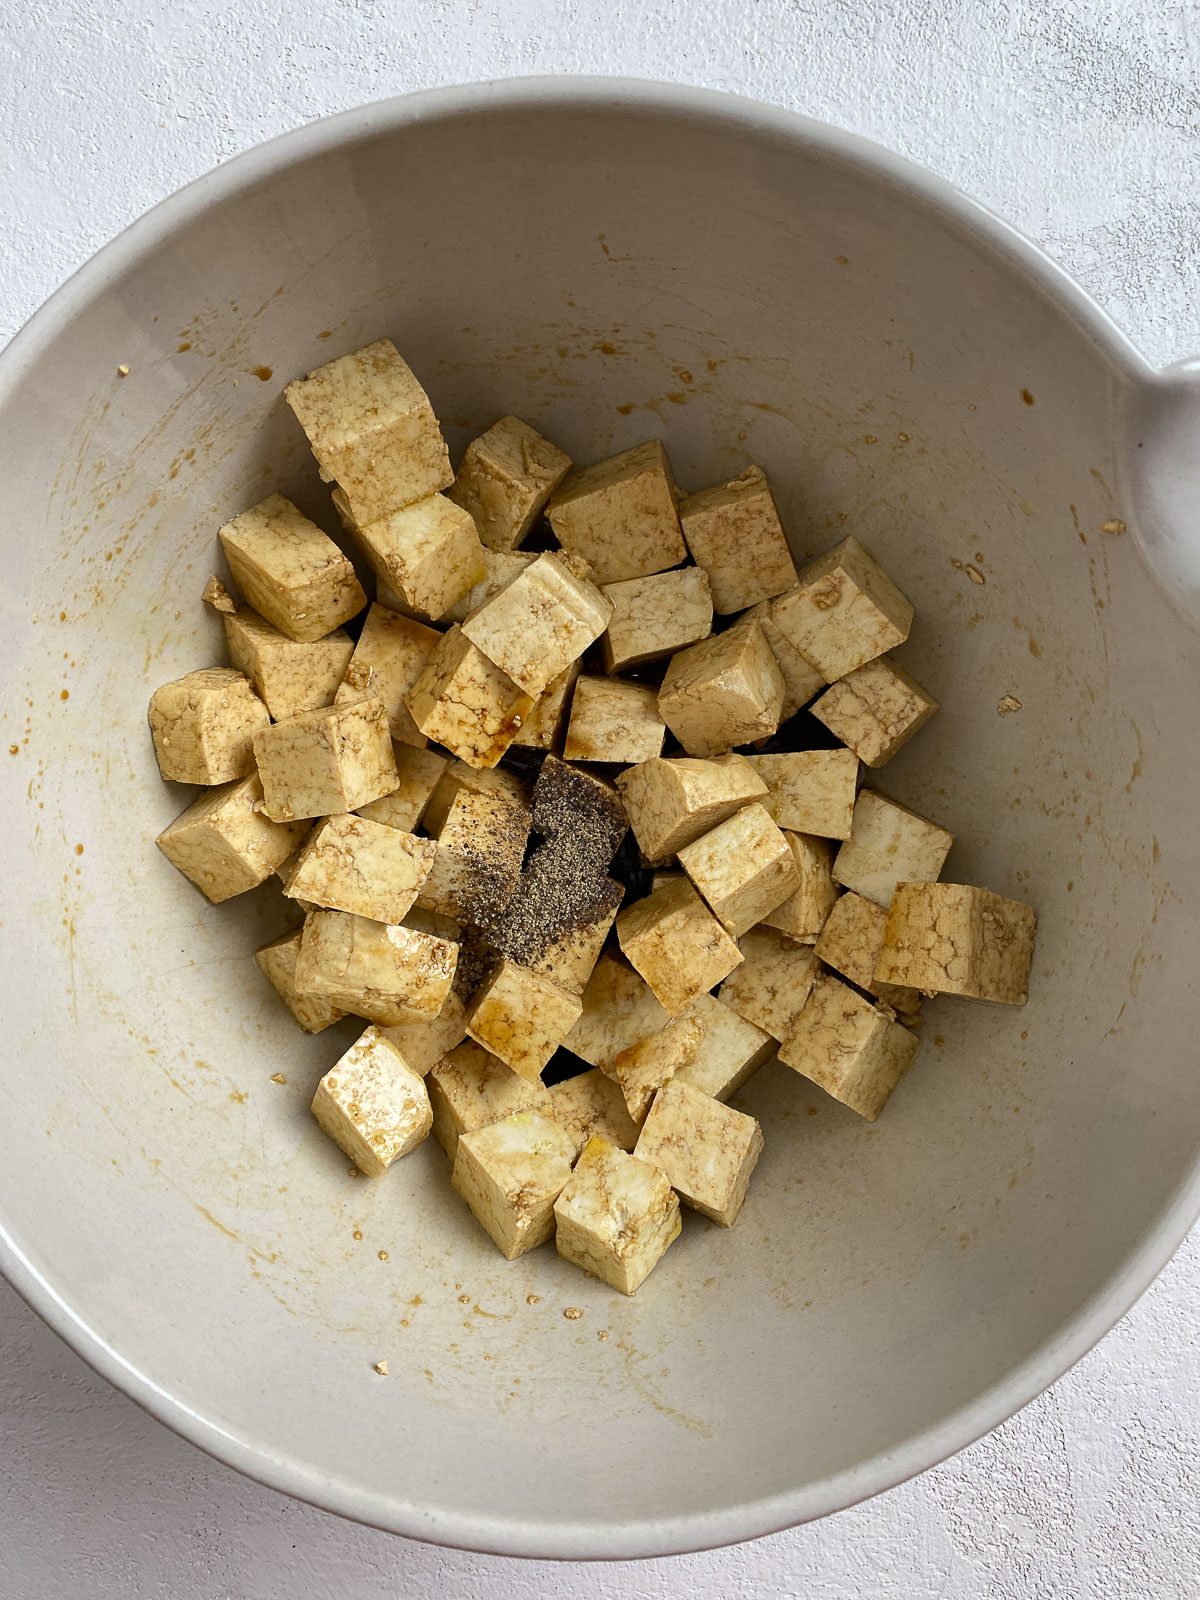 post mixing of soy sauce and oil in a white bowl